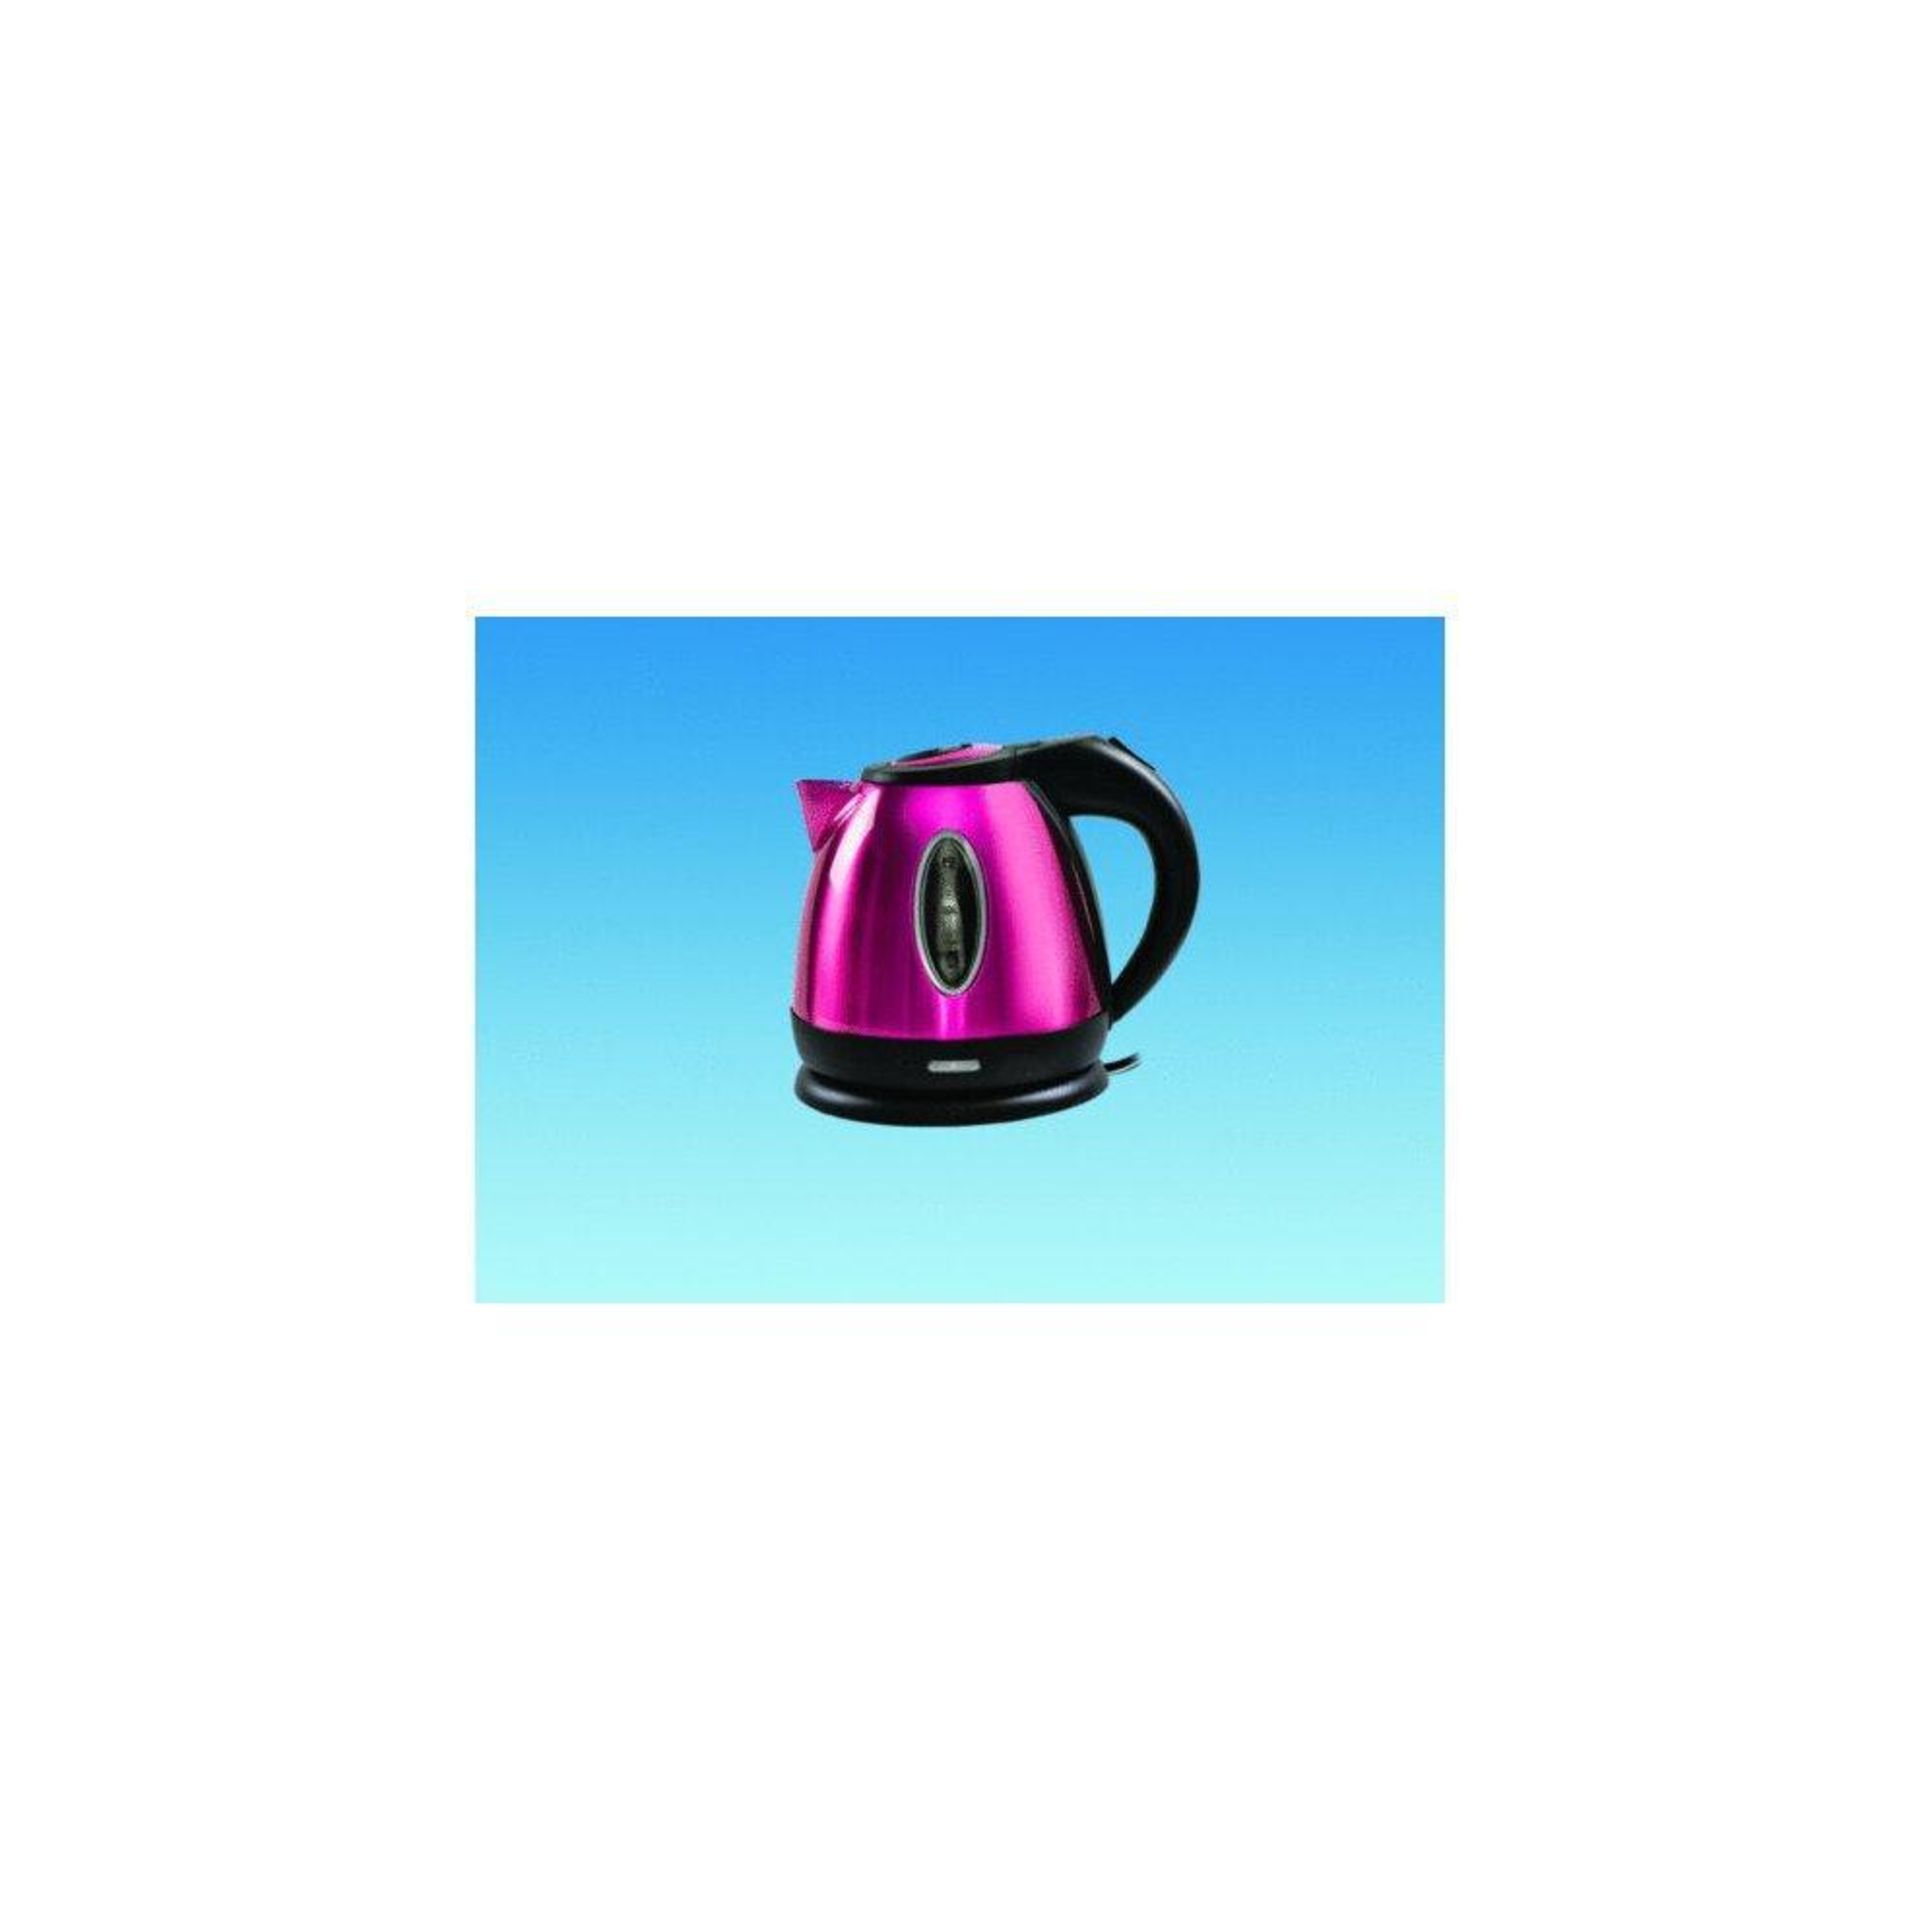 Black Stainless Steel Whistling Stove Top Kettle - 2.5L - ER51. If youâ€™re looking to add a touch